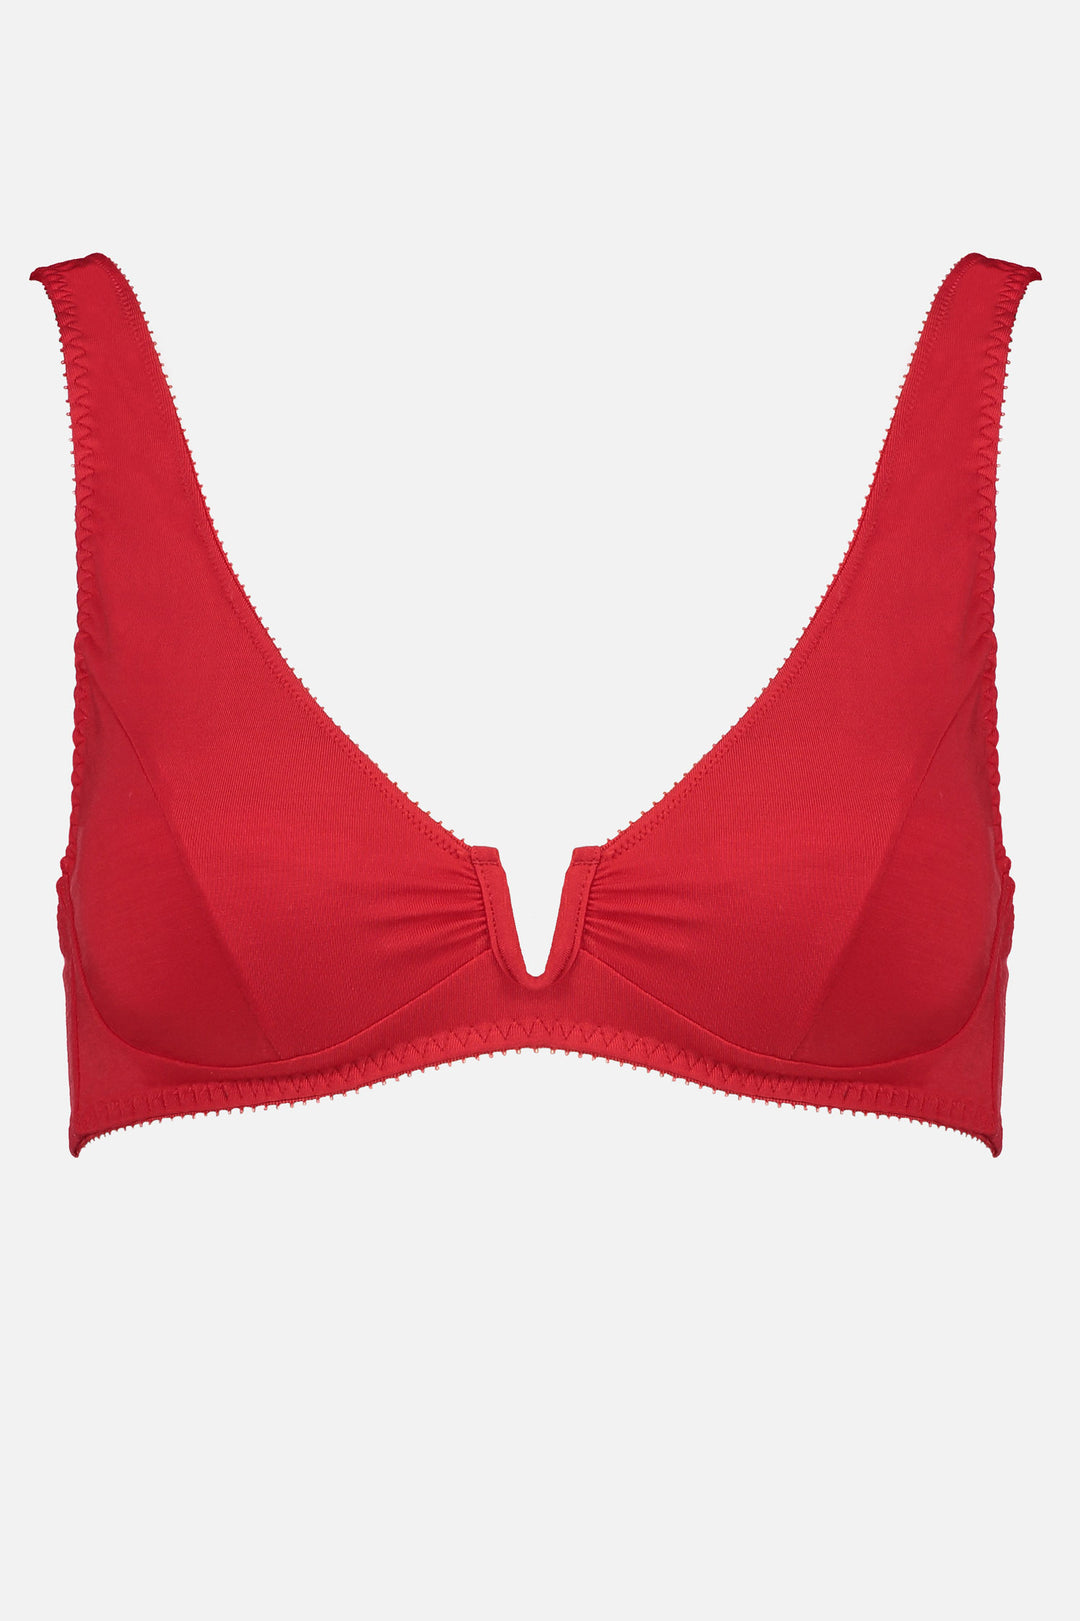 Videris Lingerie Sarah underwire free soft cup bra in red TENCEL™ with a scooped plunge cup and front U wire